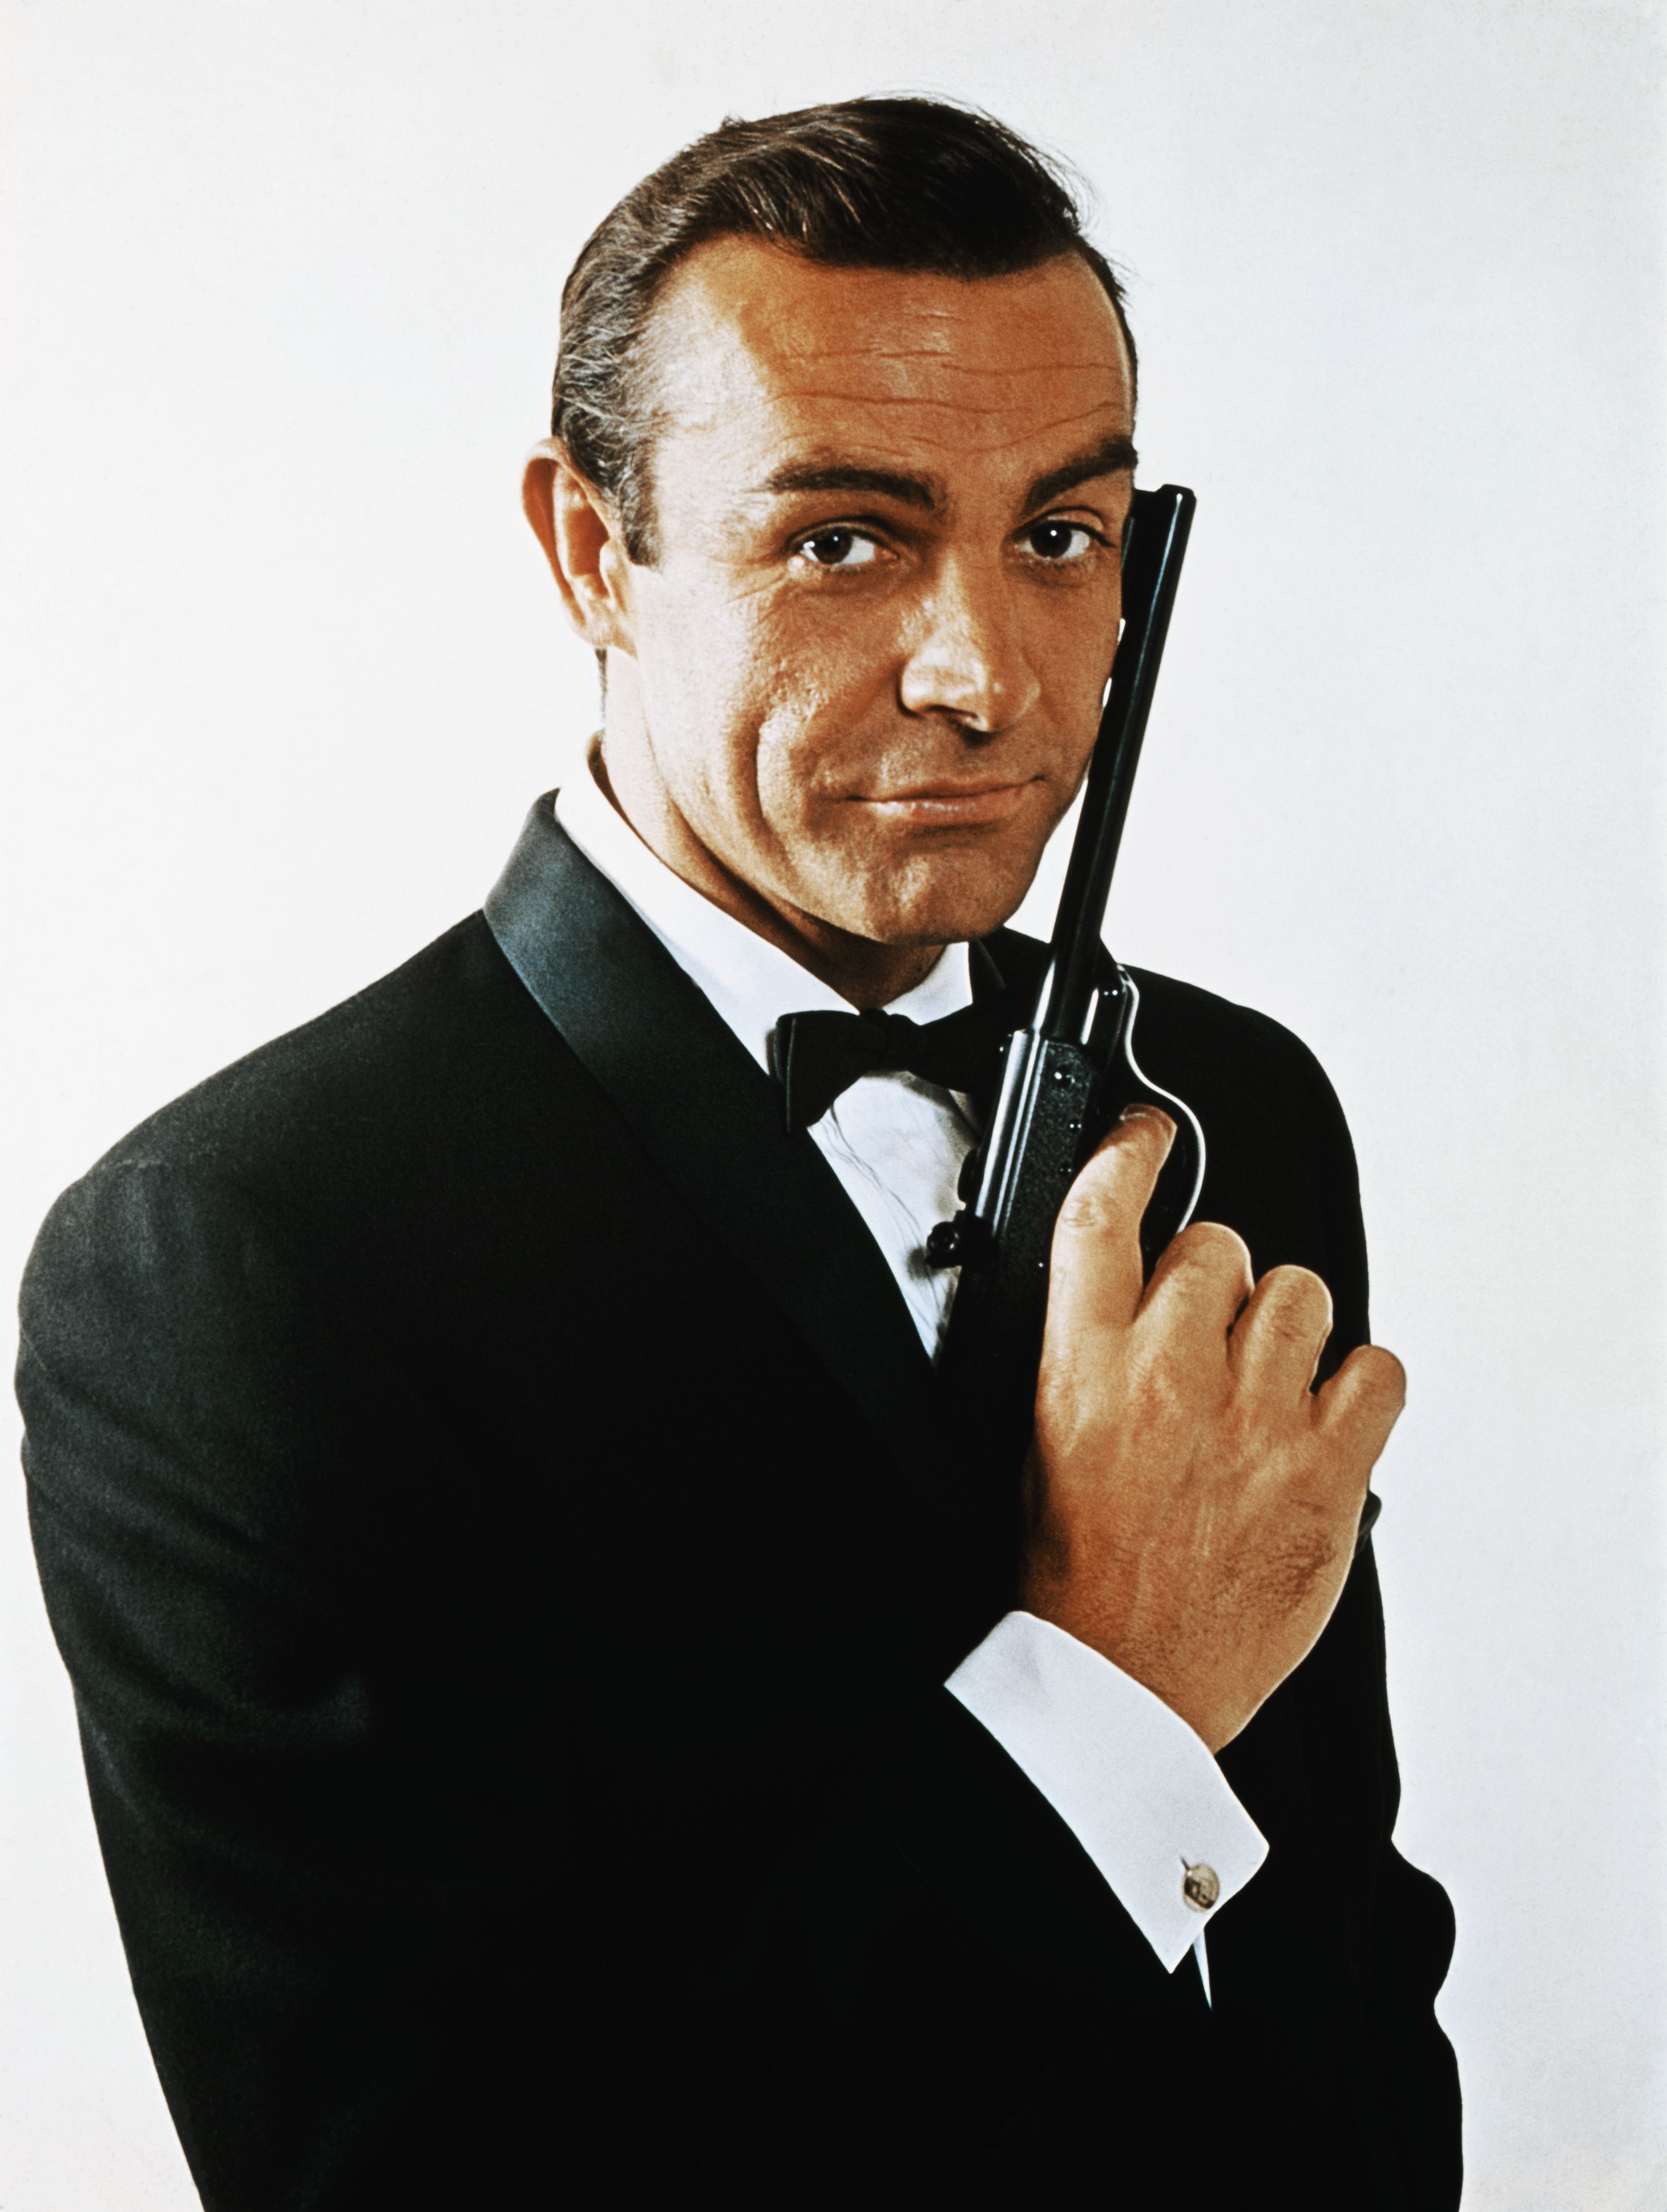 All 6 James Bond film actors, ranked in order of greatness - Smooth